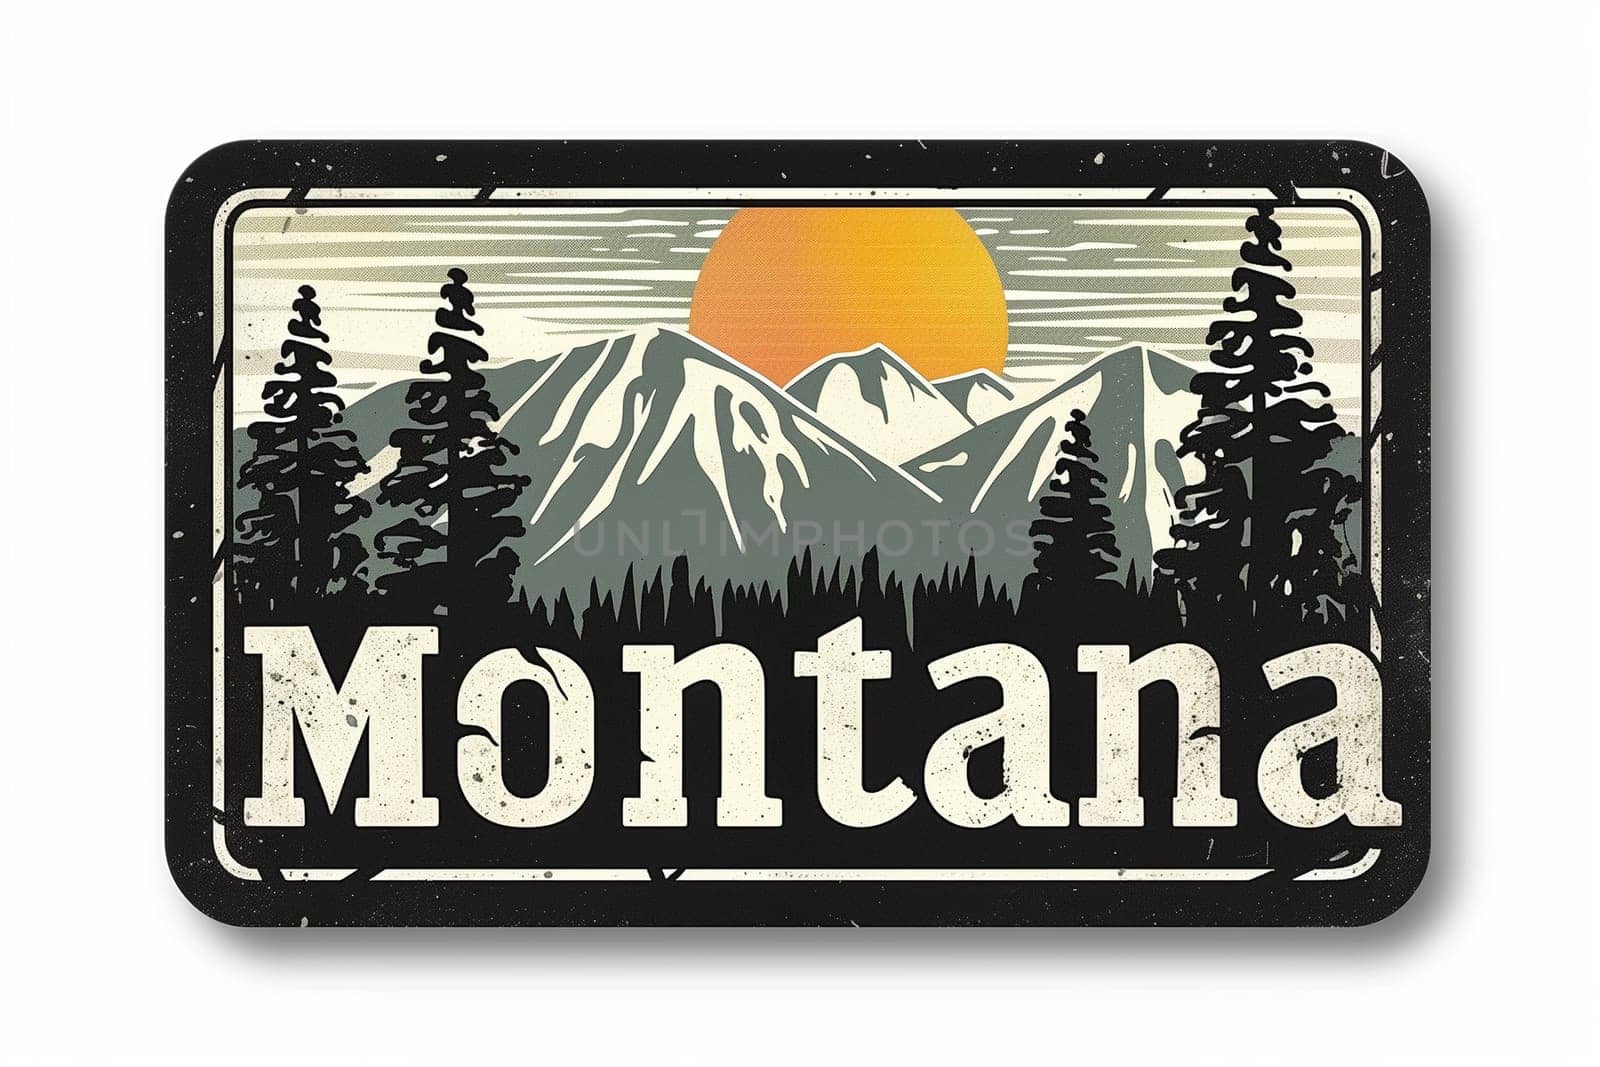 A sticker displaying the word Montana in bold lettering. The sticker is colorful and eye-catching.